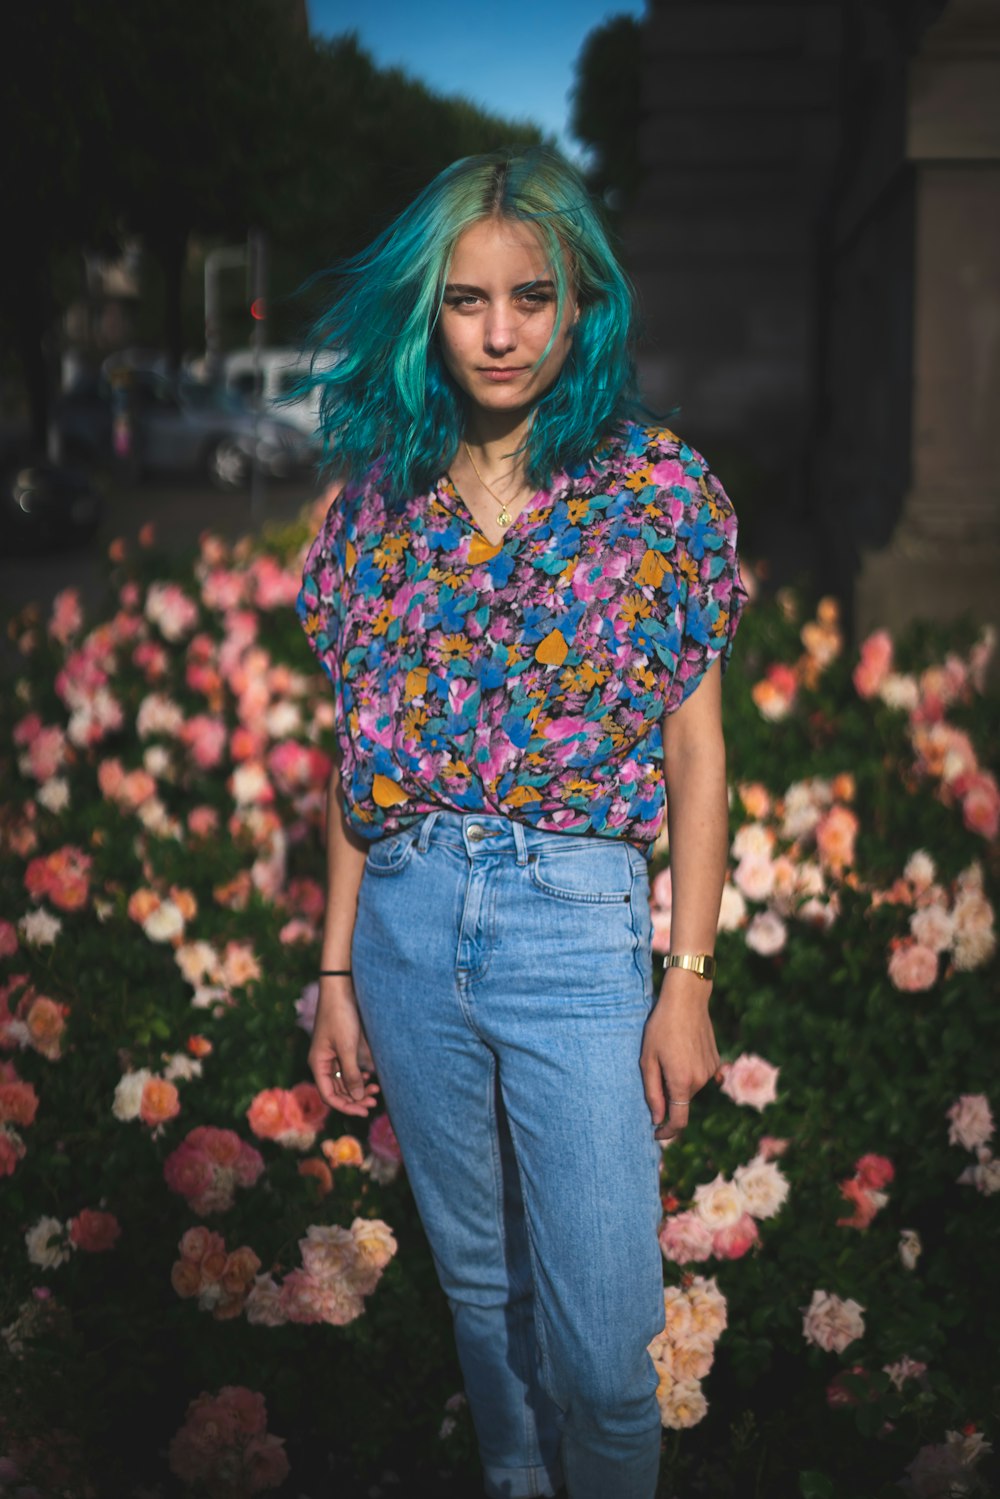 woman in blue red and white floral shirt and blue denim jeans standing on red flower